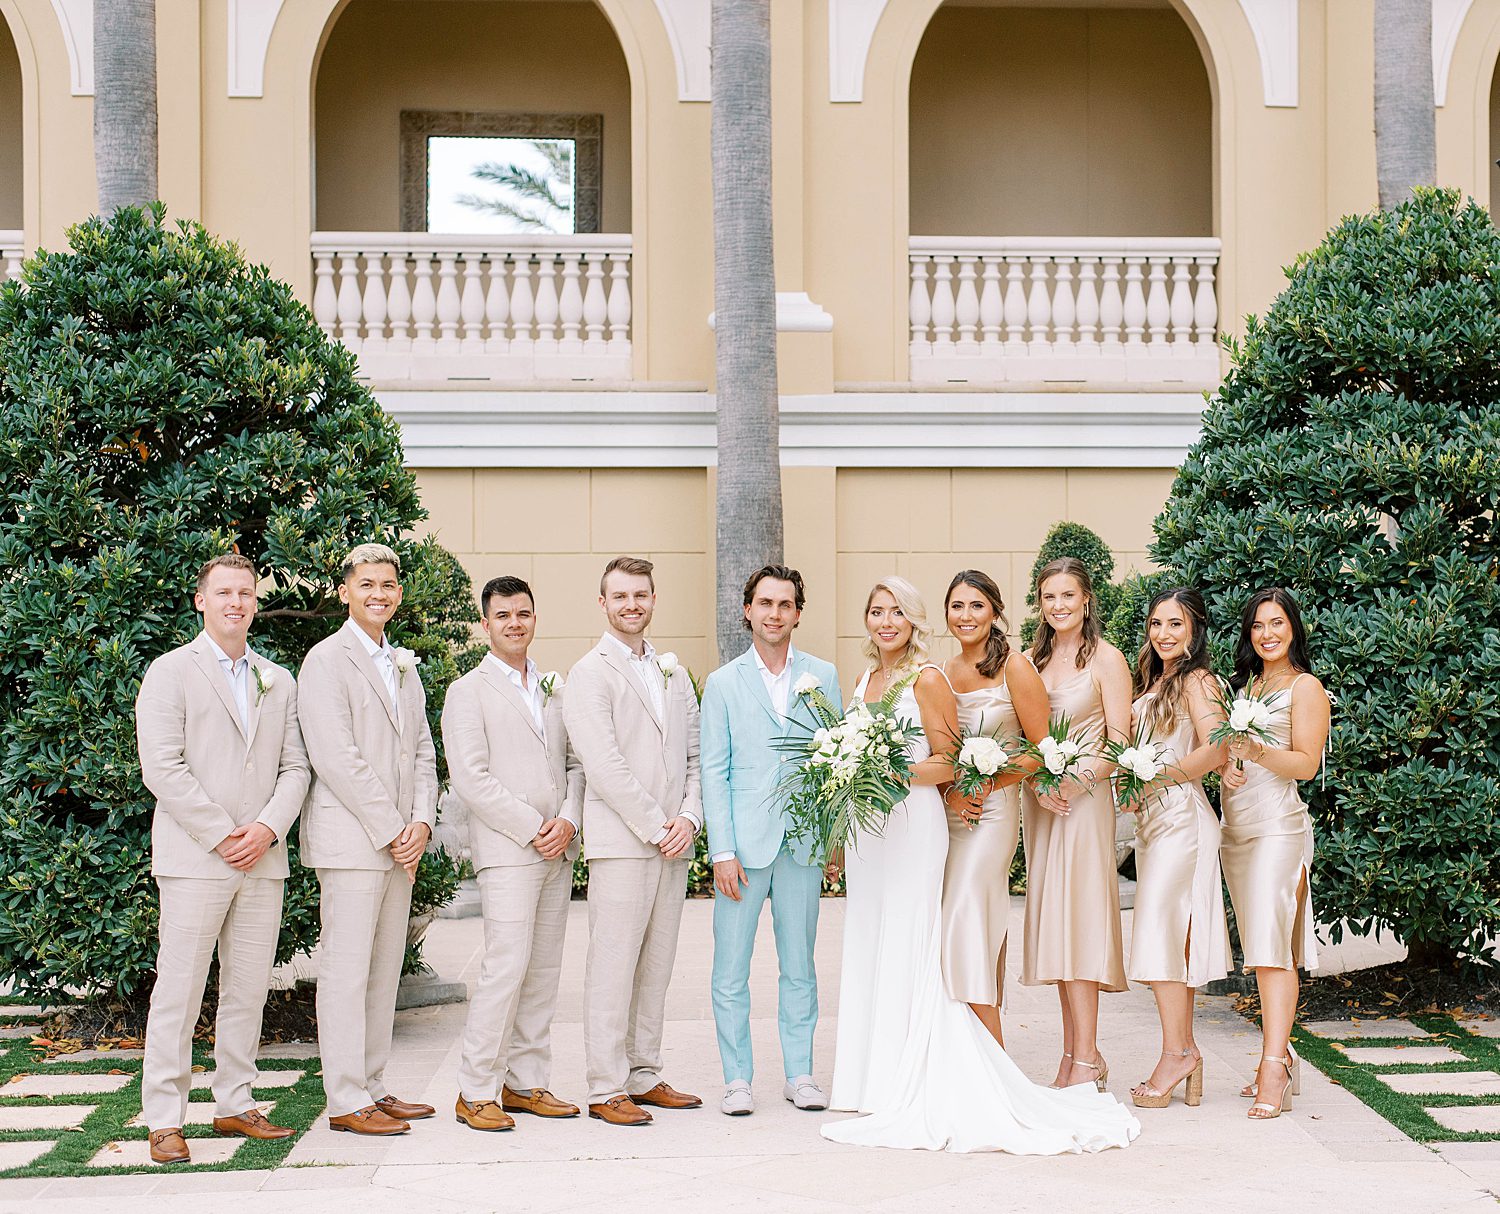 bride and groom pose with wedding party in tan and Champagne gowns